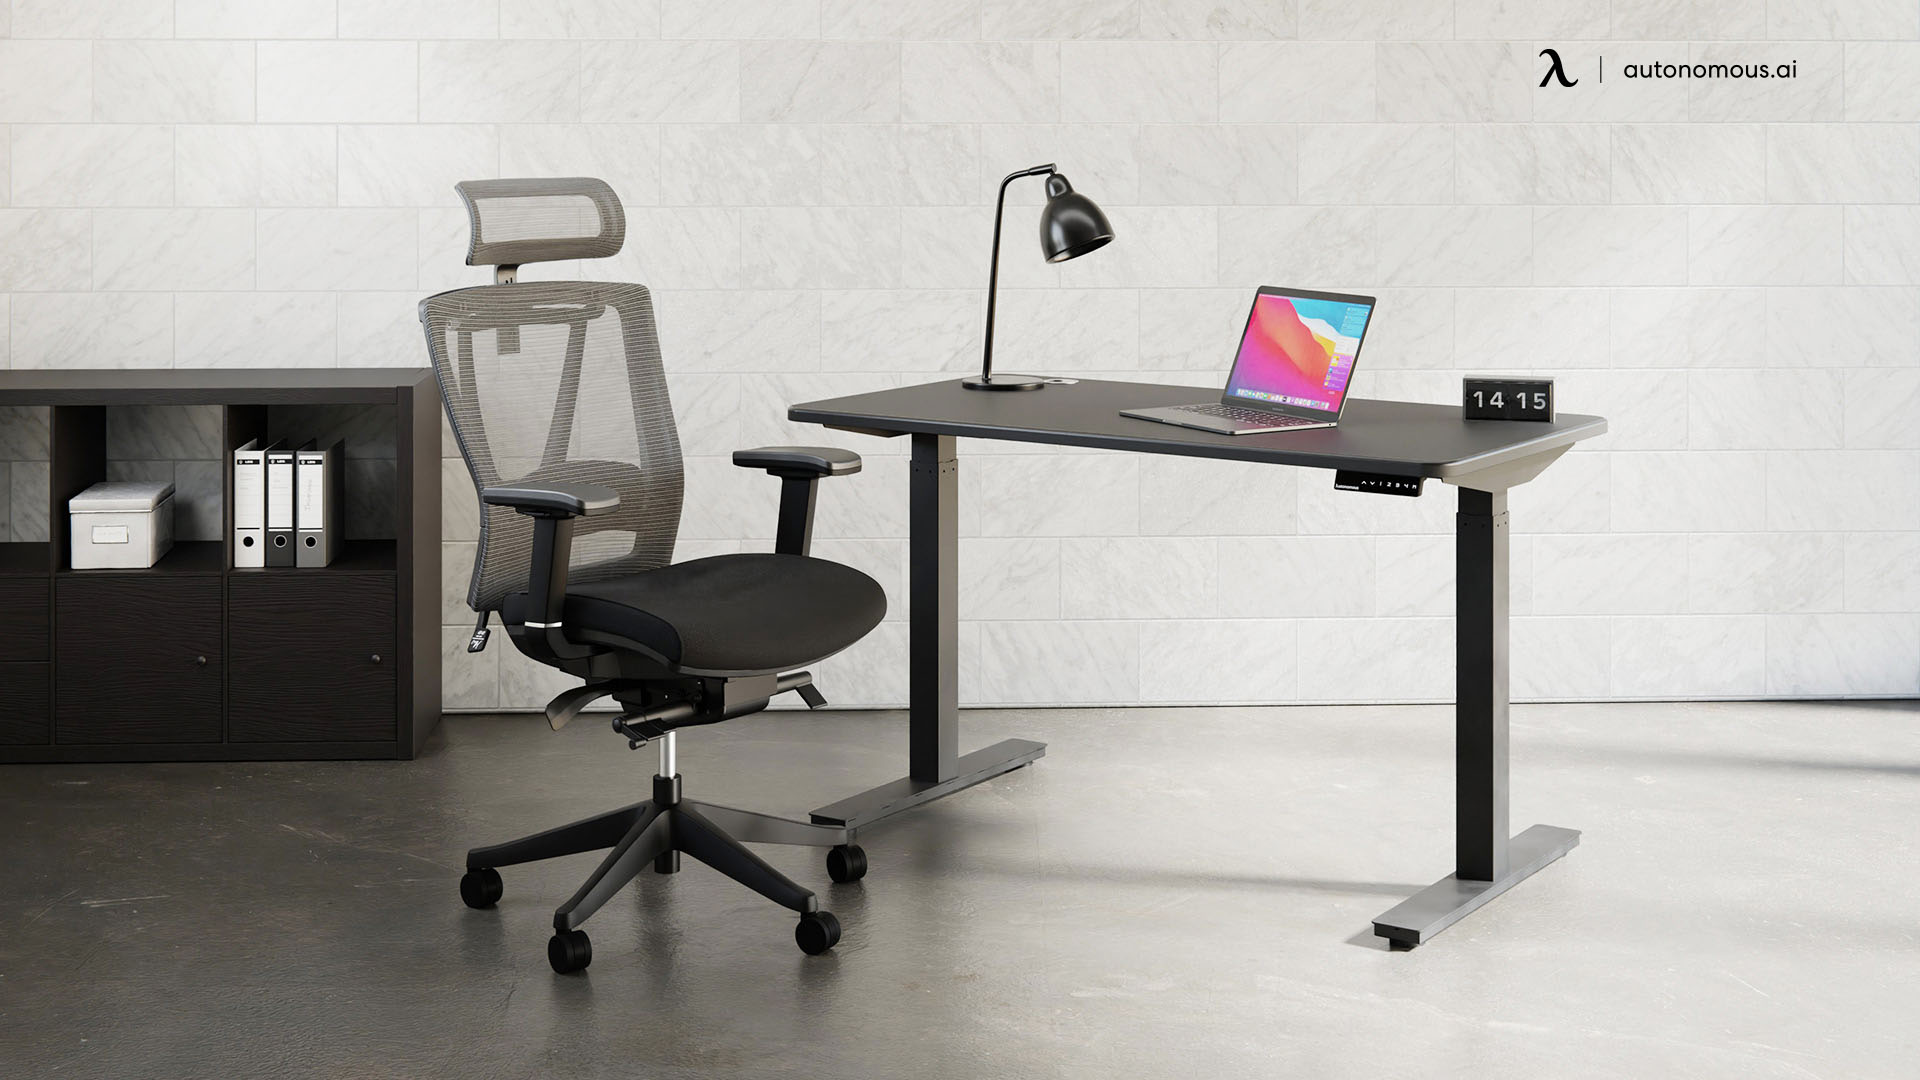 An ergonomic office chair to sit in